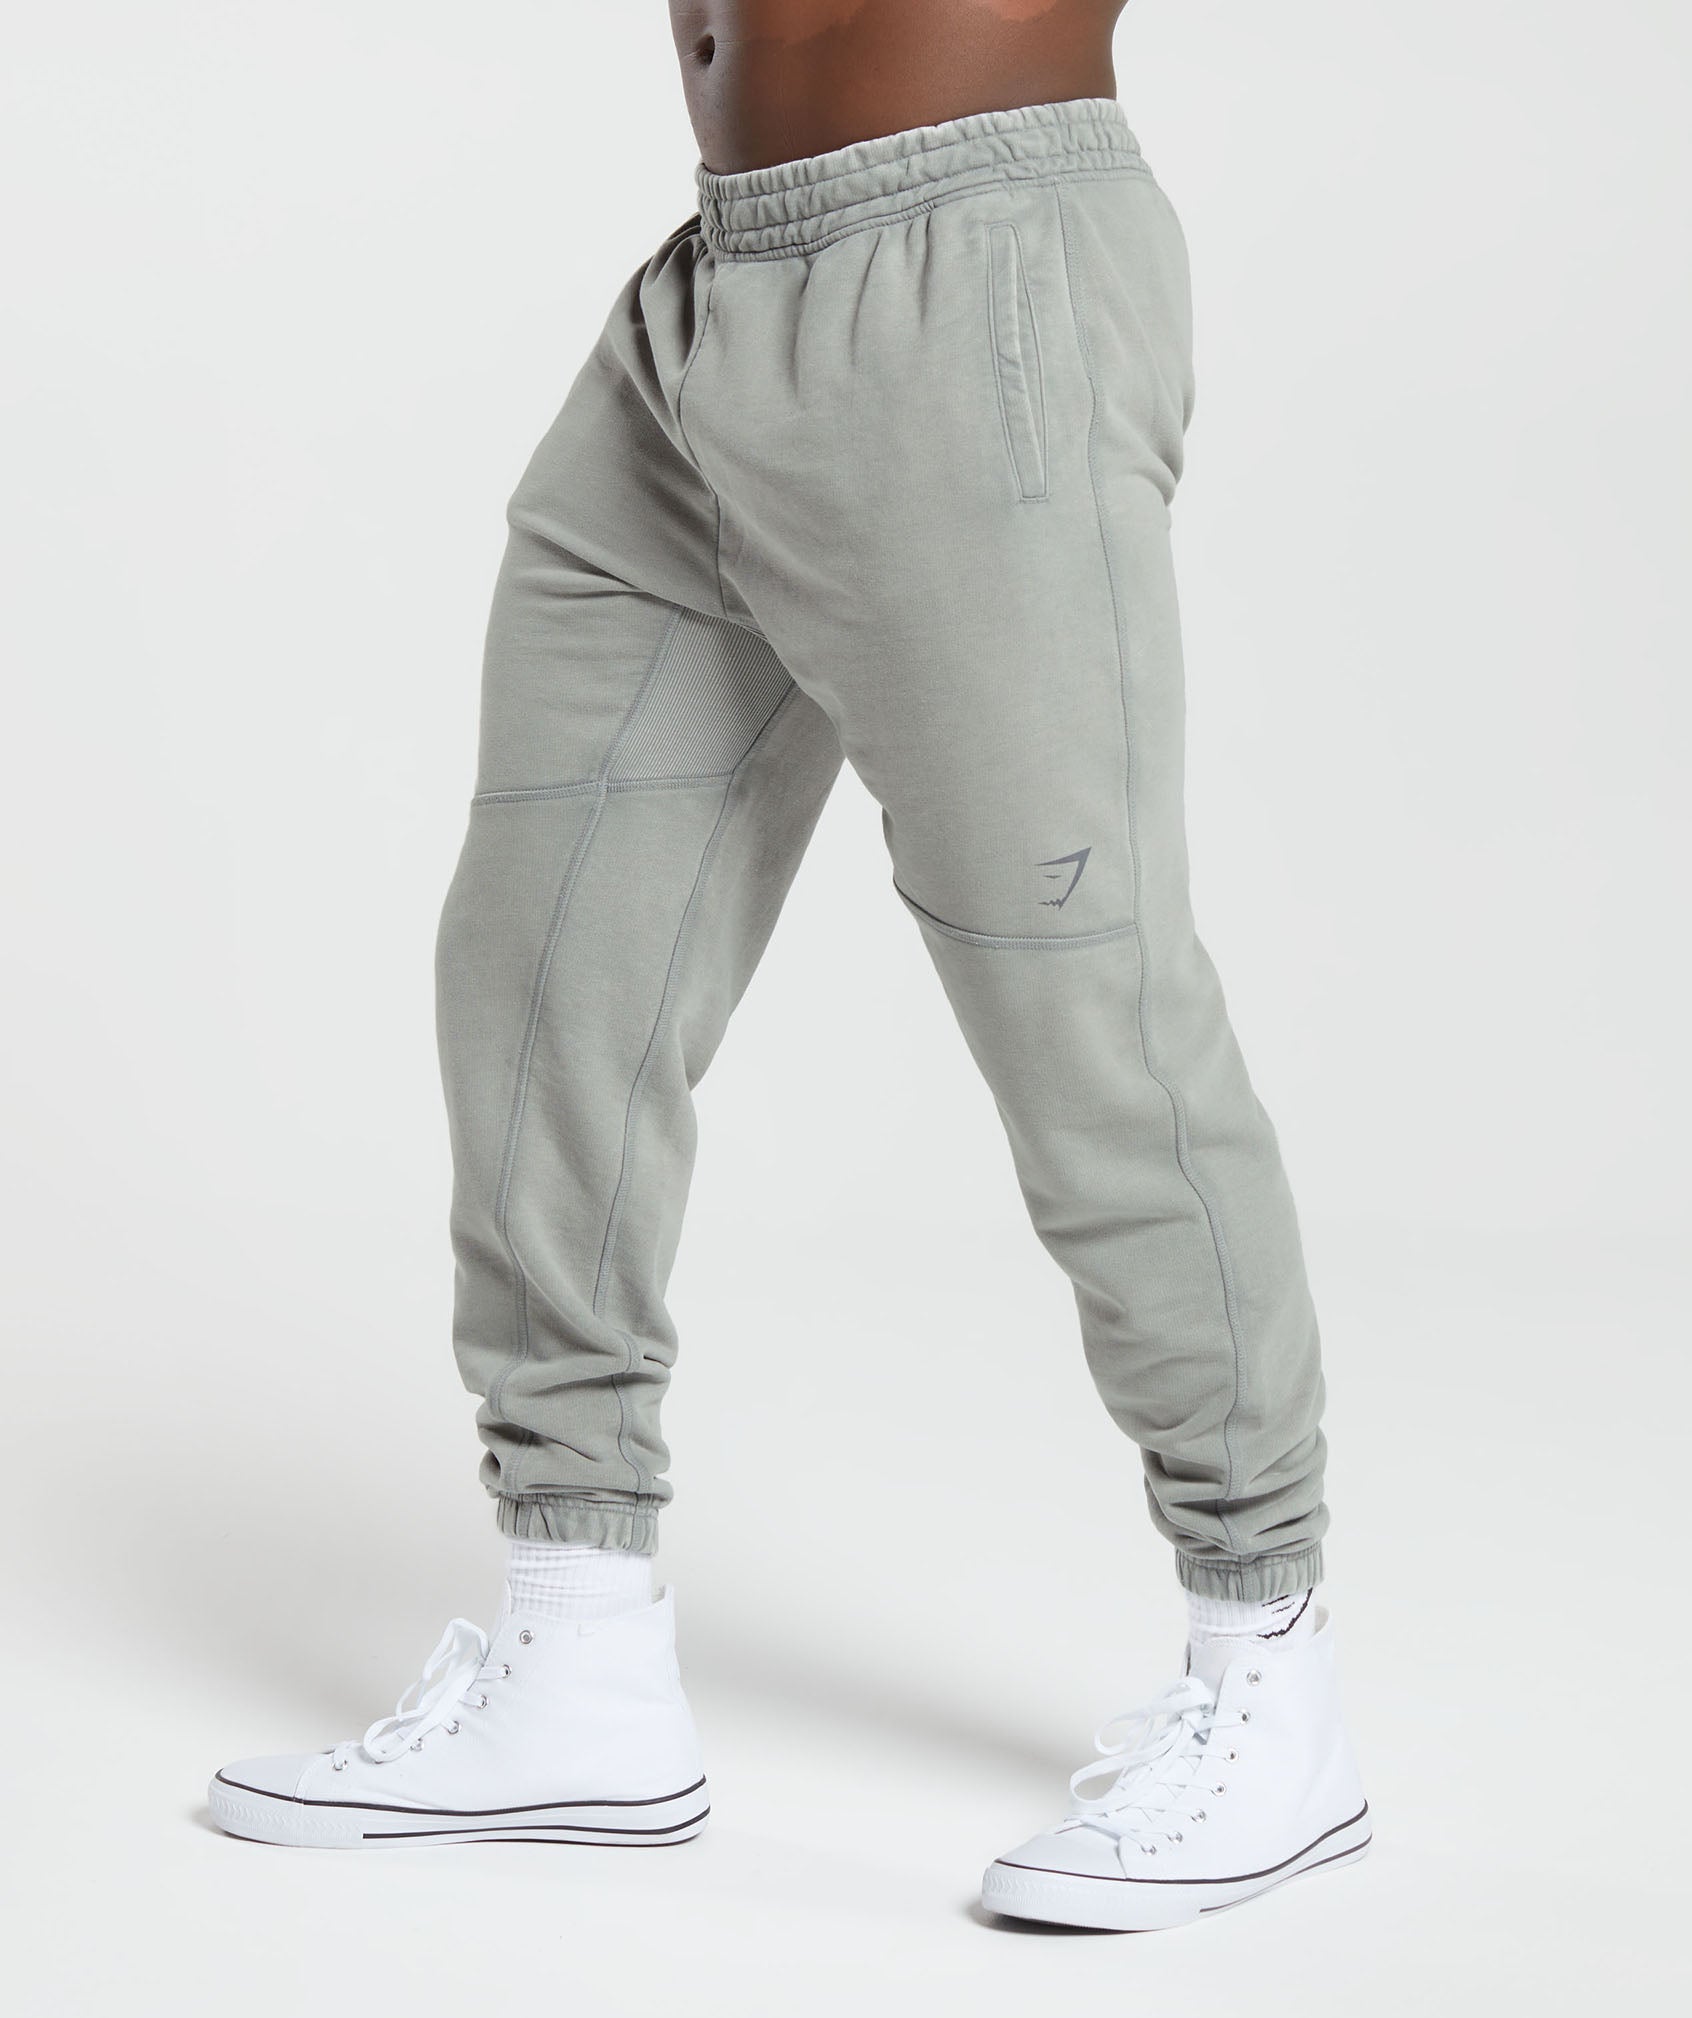 Heritage Joggers product image 3